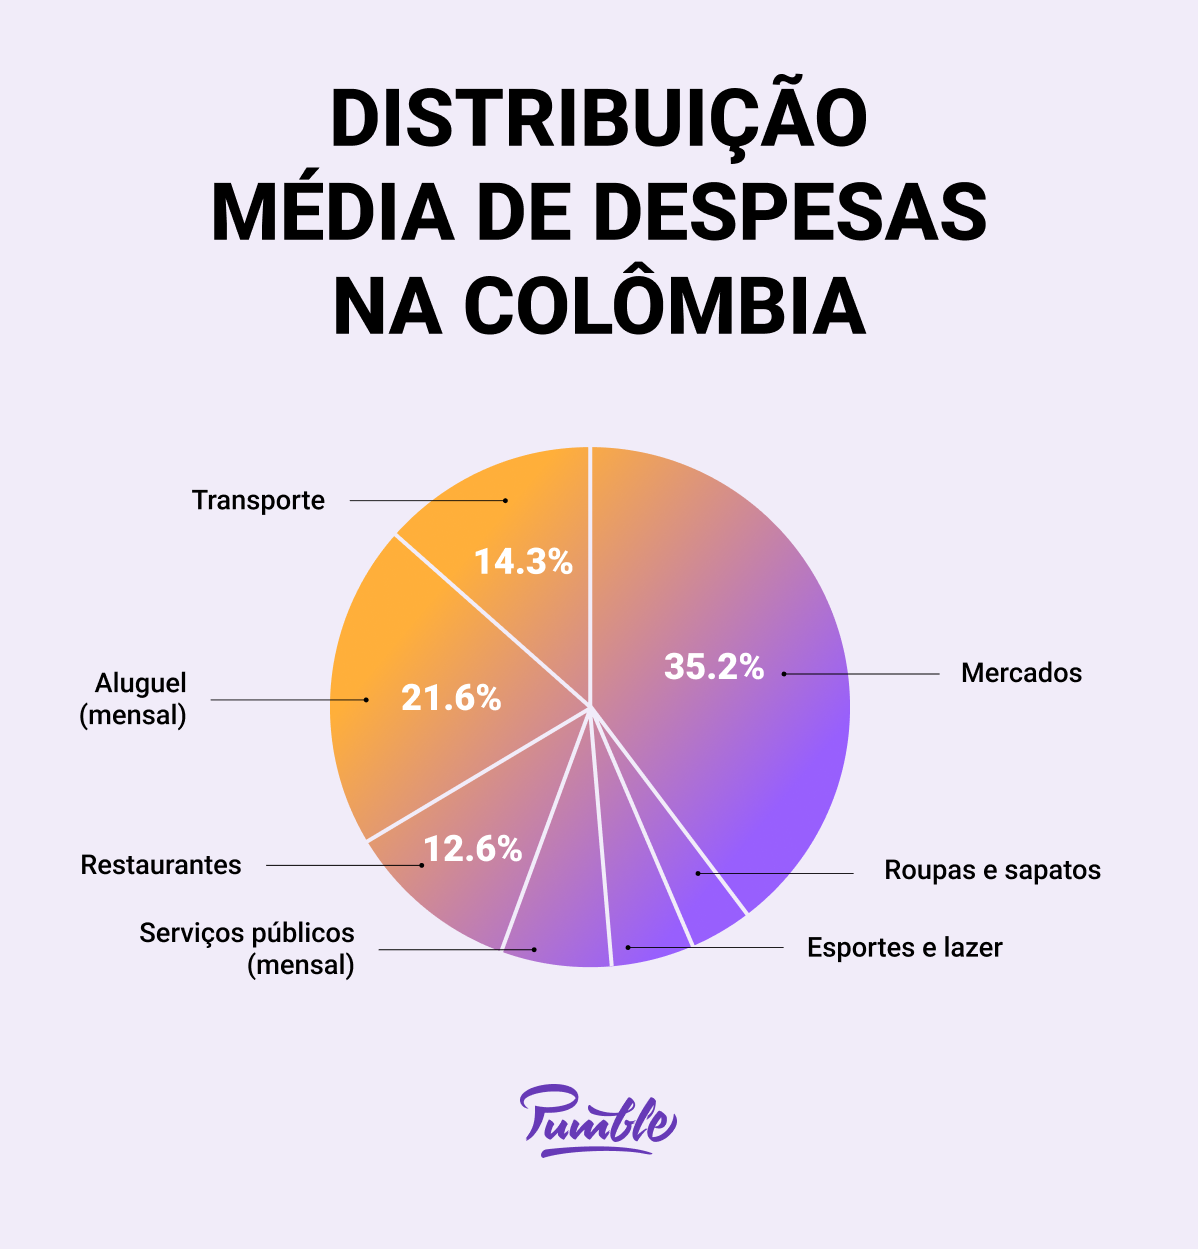 Average distribution of expenses in Colombia